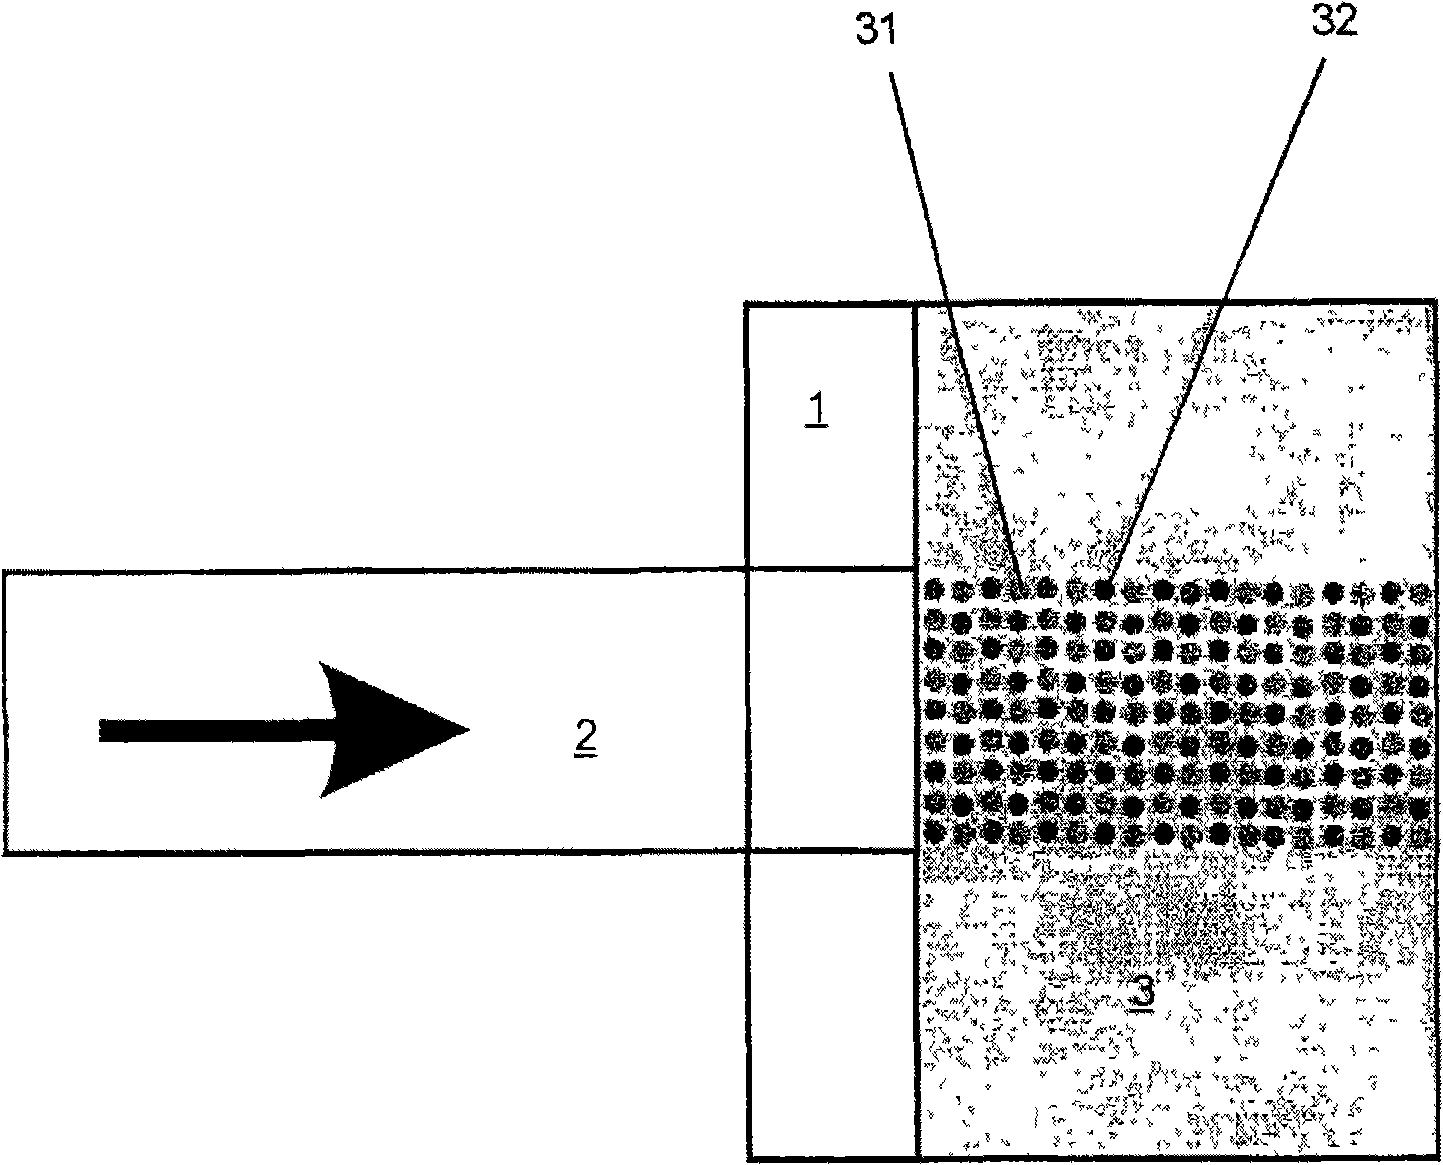 Pigment layer and method of permanently scribing a substrateby means of high-energy radiation